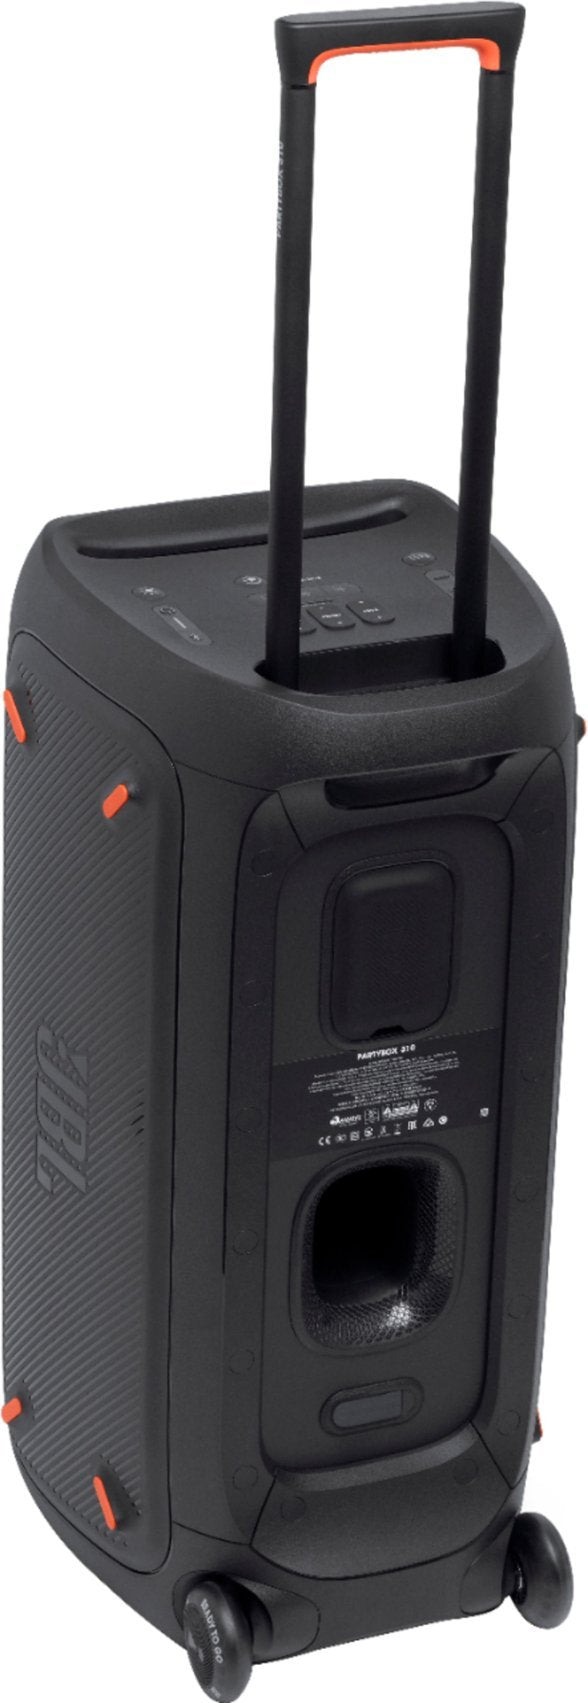 JBL Partybox 310 Portable Party Speaker